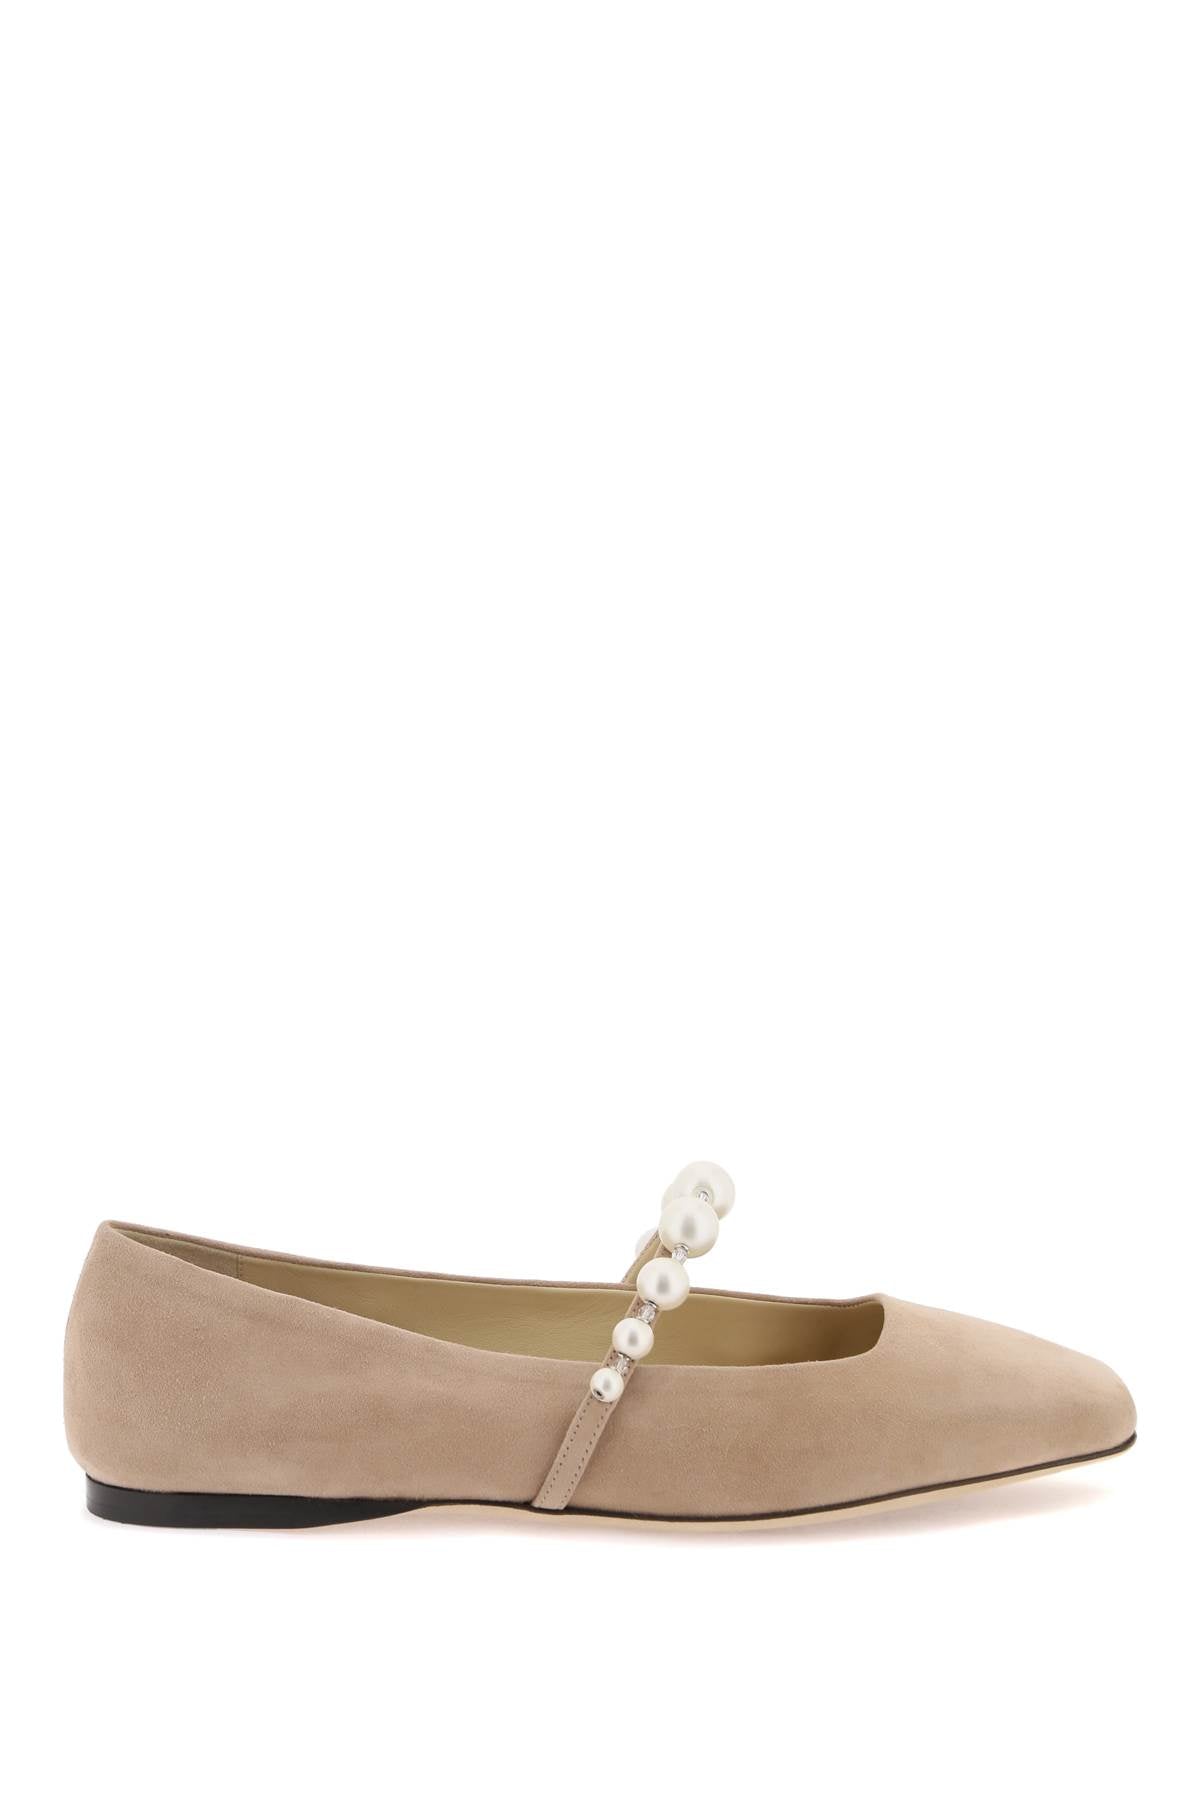 Jimmy choo suede leather ballerina flats with pearl-0